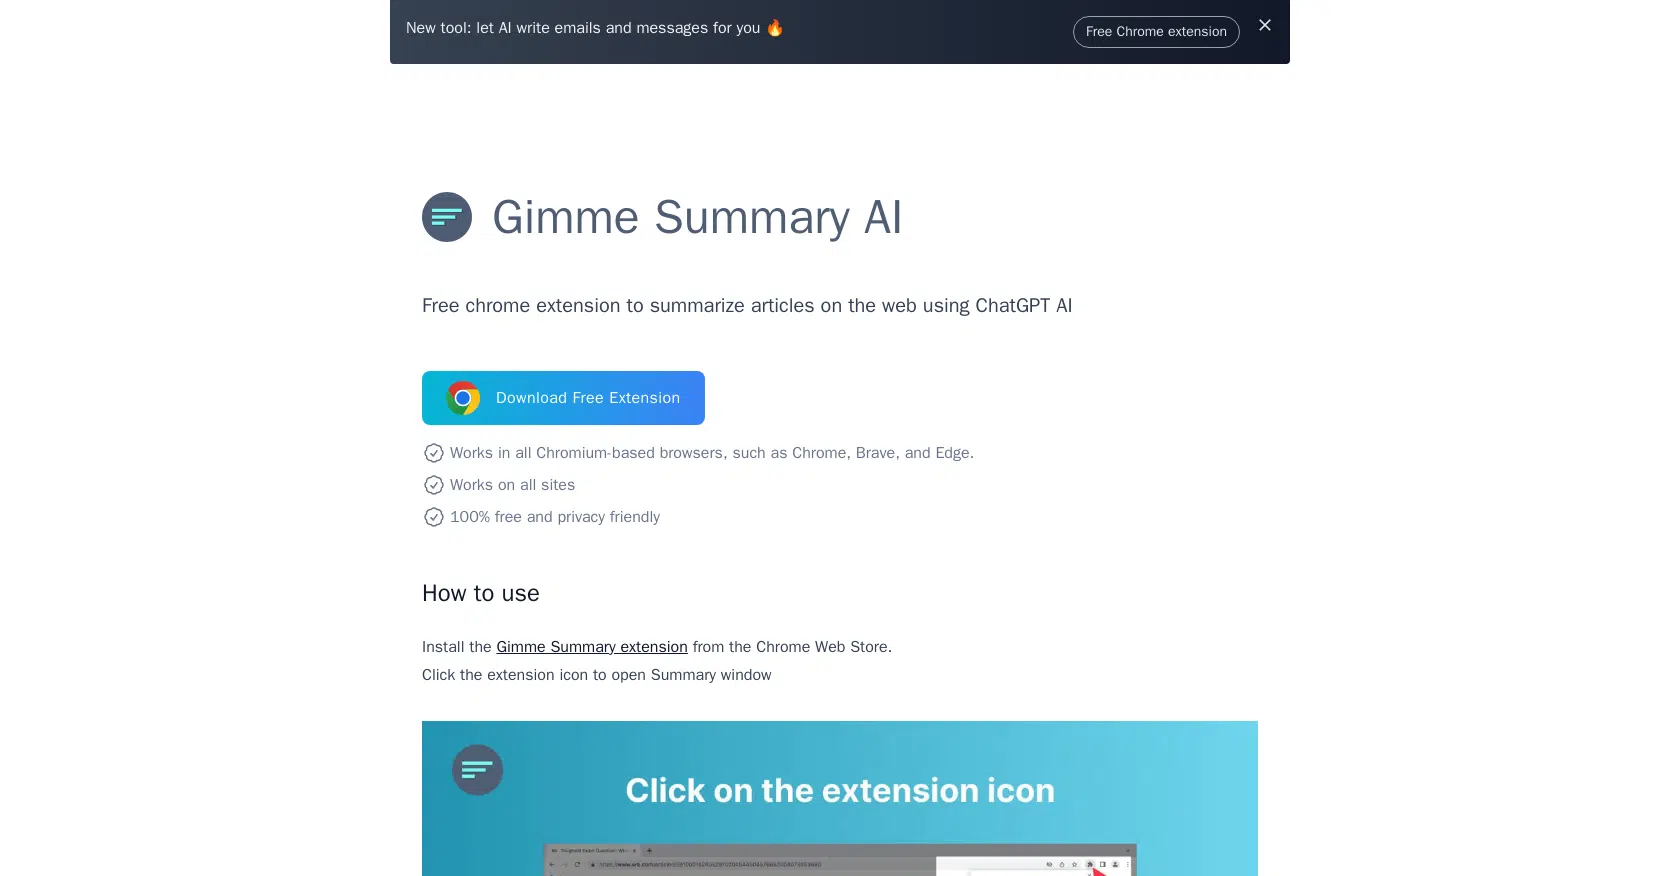 Gimme Summary AIwebsite picture